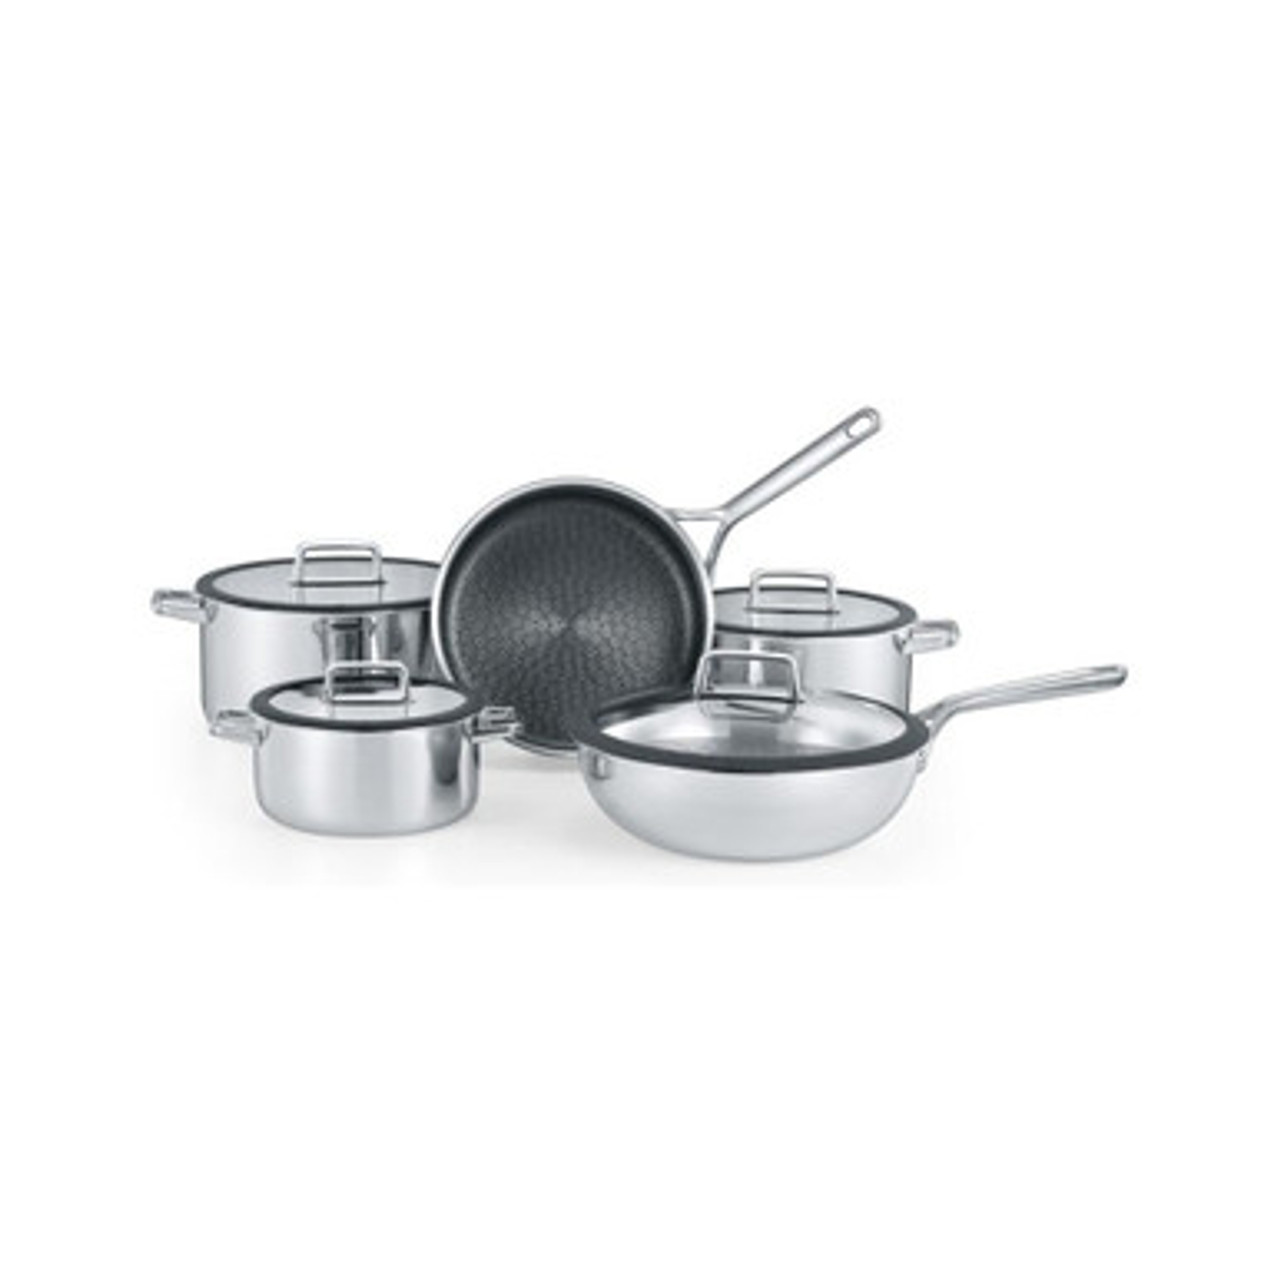 Cookware Duty Heavy set Nonstick Stainless Steel Arshia 10pcs